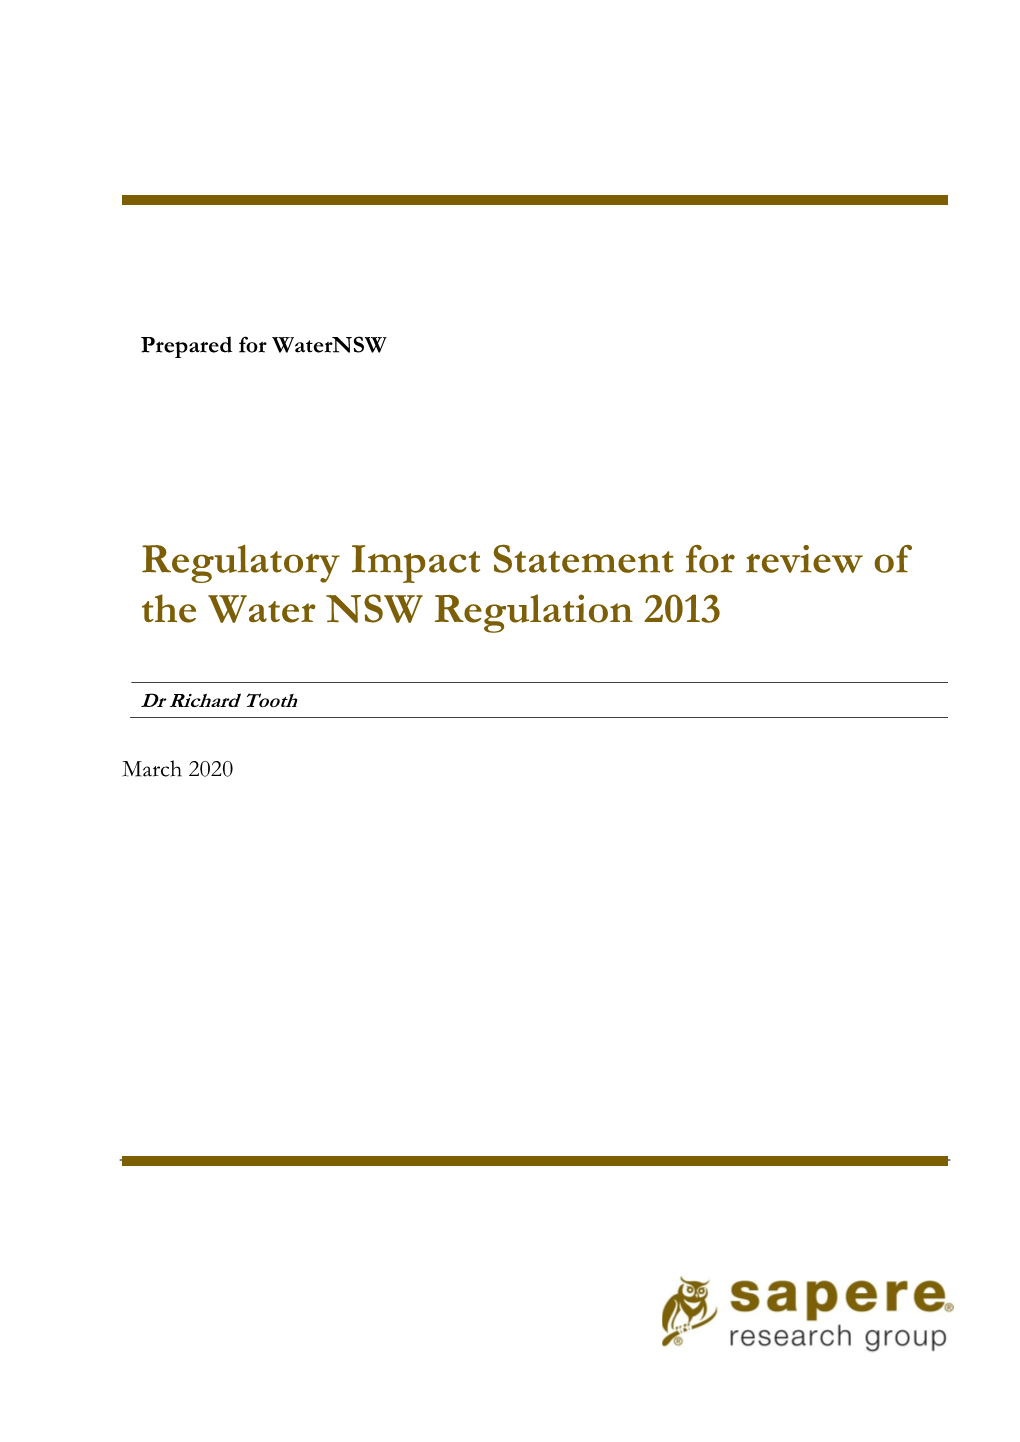 Regulatory Impact Statement for Review of the Water NSW Regulation 2013